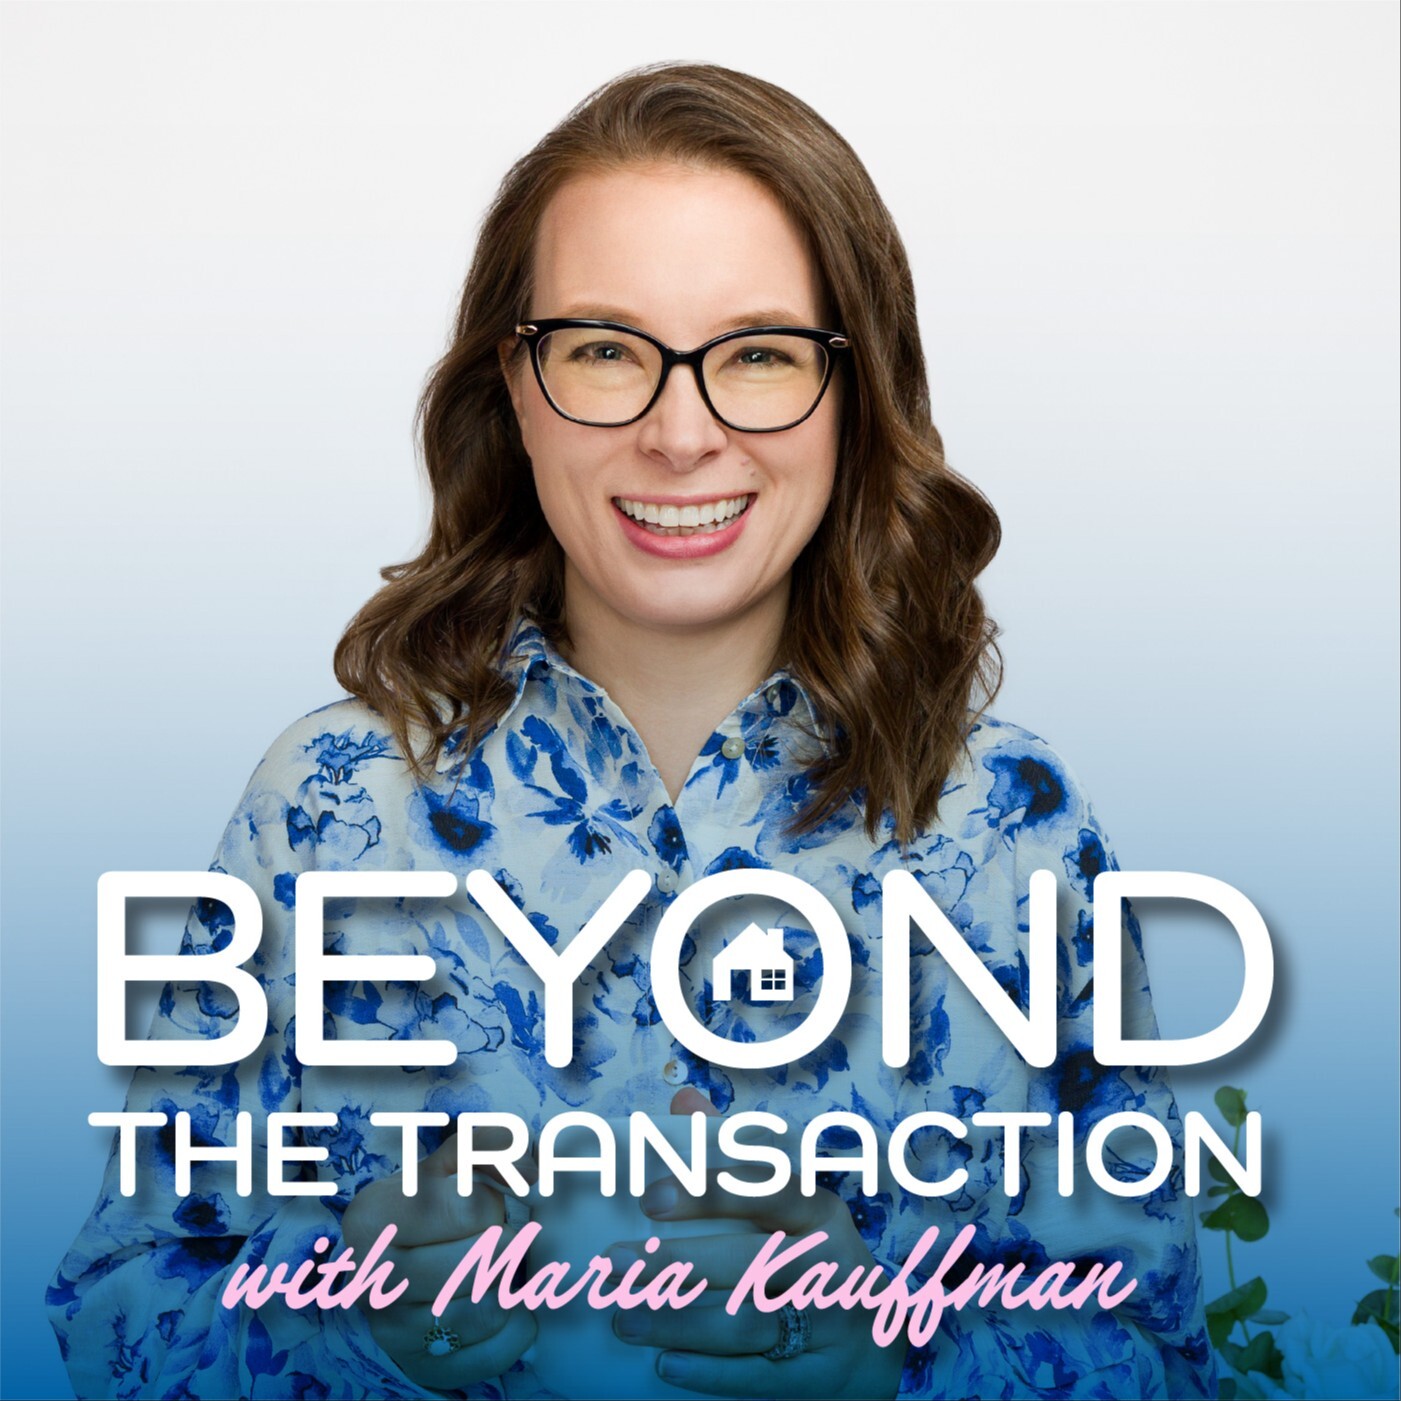 Beyond the Transaction with Maria Kauffman